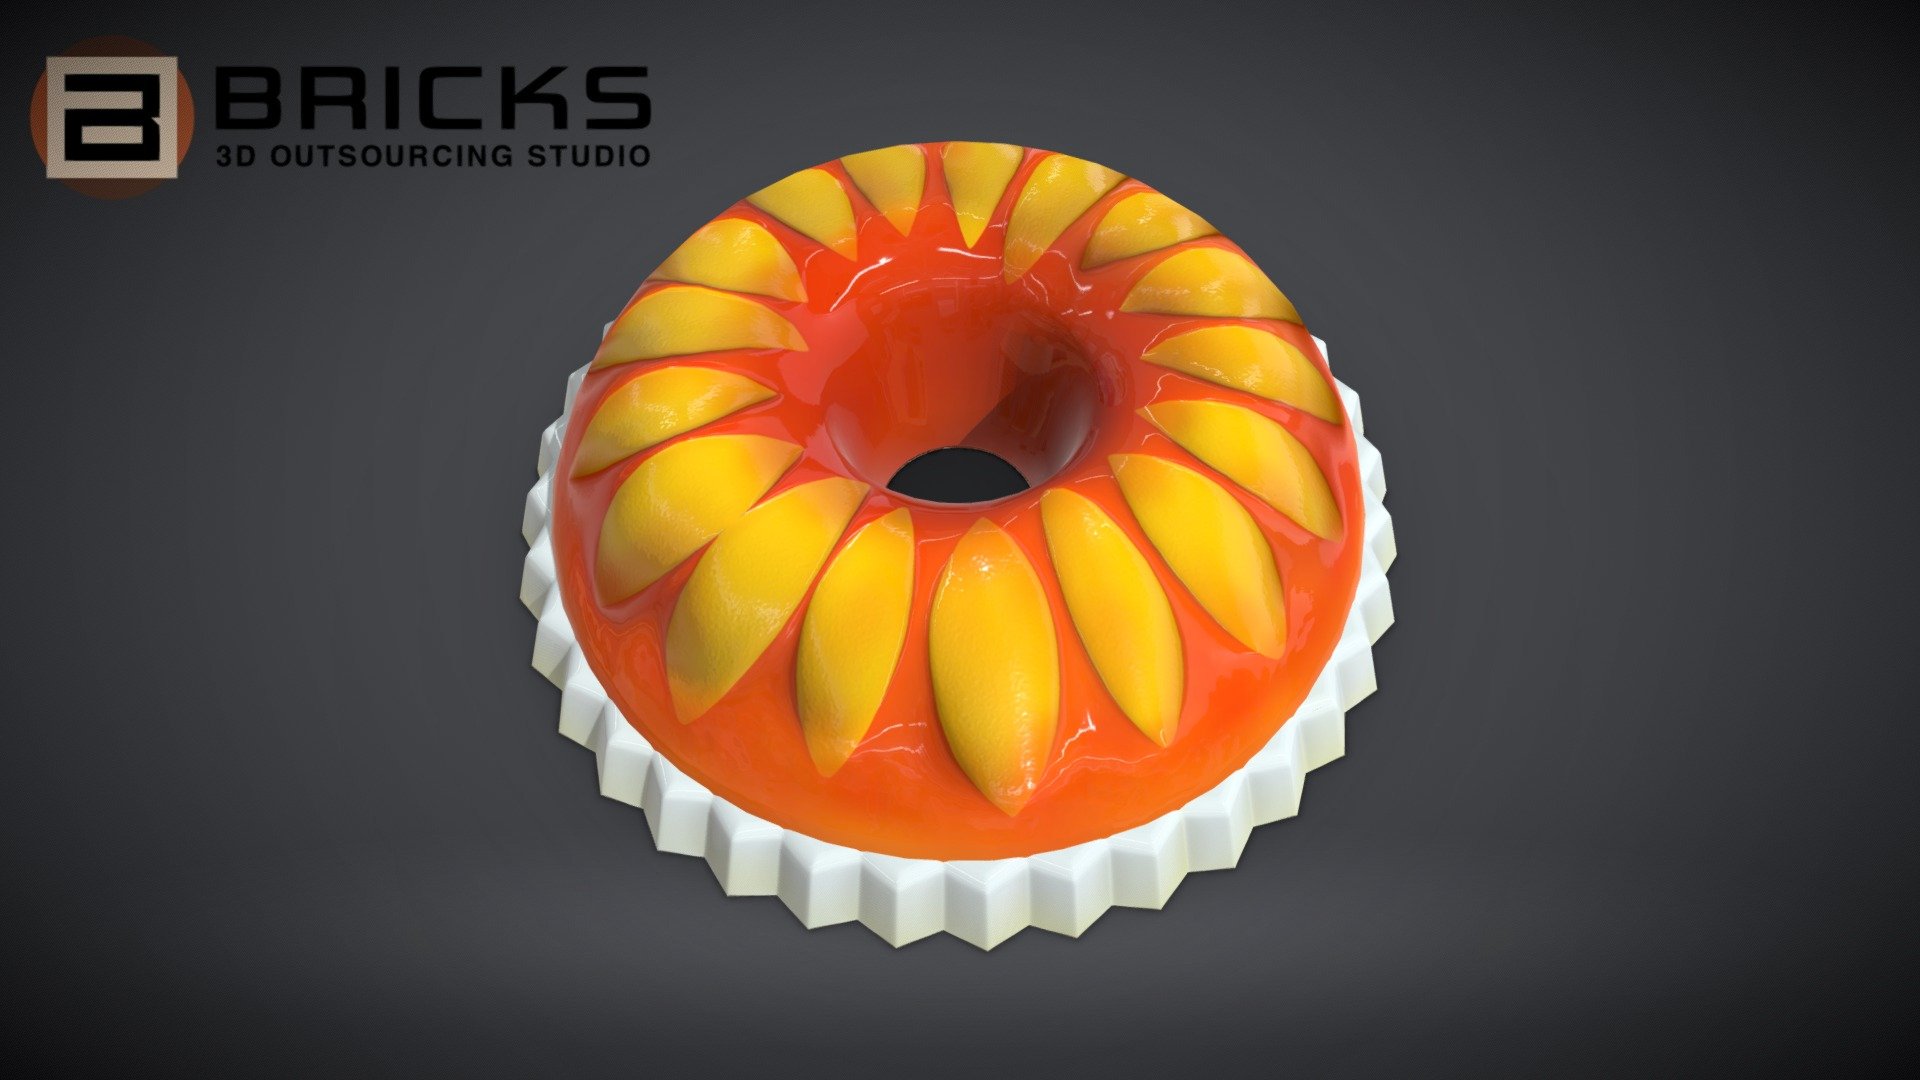 PBR Food Asset:
PeachJelly
Polycount: 1552
Vertex count: 868
Texture Size: 2048px x 2048px
Normal: OpenGL

If you need any adjust in file please contact us: team@bricks3dstudio.com

Hire us: tringuyen@bricks3dstudio.com
Here is us: https://www.bricks3dstudio.com/
        https://www.artstation.com/bricksstudio
        https://www.facebook.com/Bricks3dstudio/
        https://www.linkedin.com/in/bricks-studio-b10462252/ - PeachJelly - Buy Royalty Free 3D model by Bricks Studio (@bricks3dstudio) 3d model